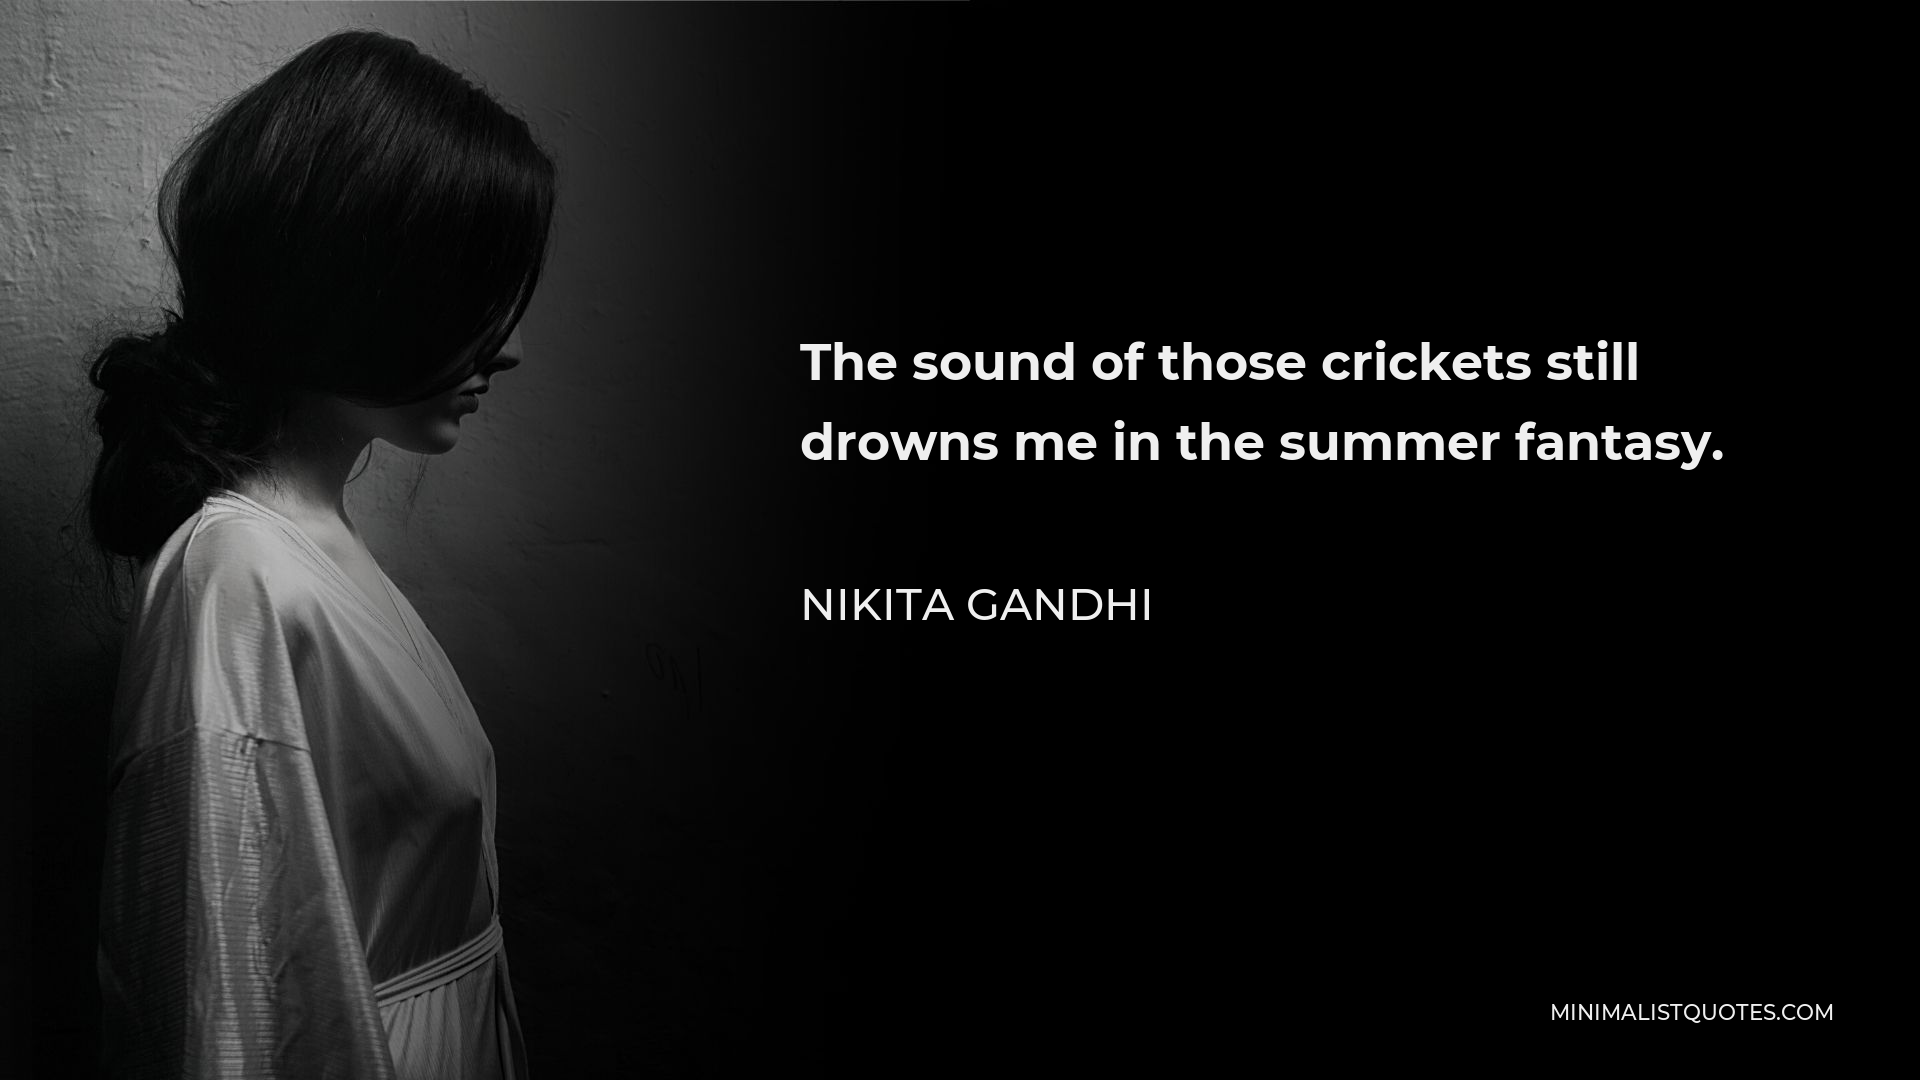 Nikita Gandhi Quote - The sound of those crickets still drowns me in the summer fantasy.